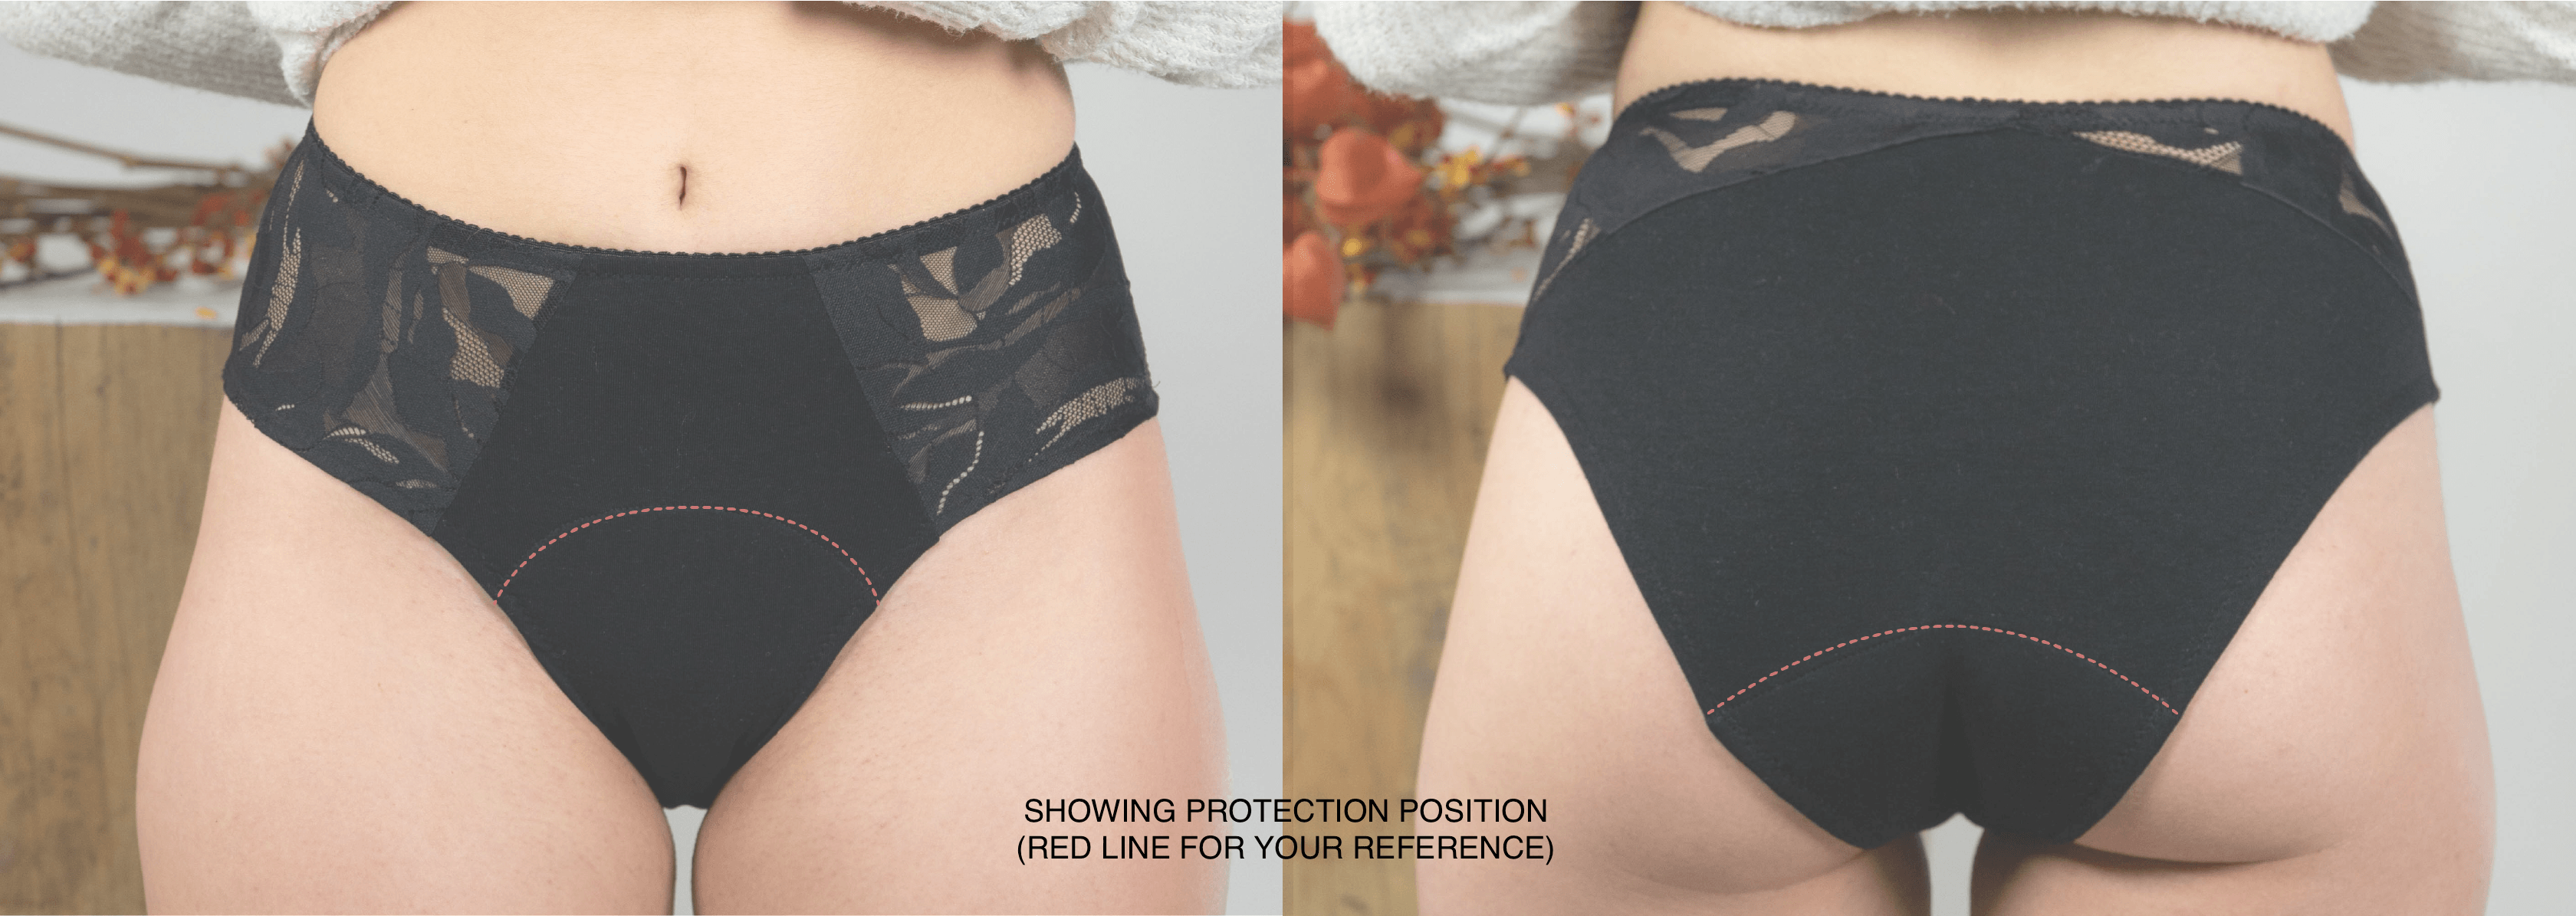 Rosaseven Lingerie Period Underwear I THERESE nightset period shorts